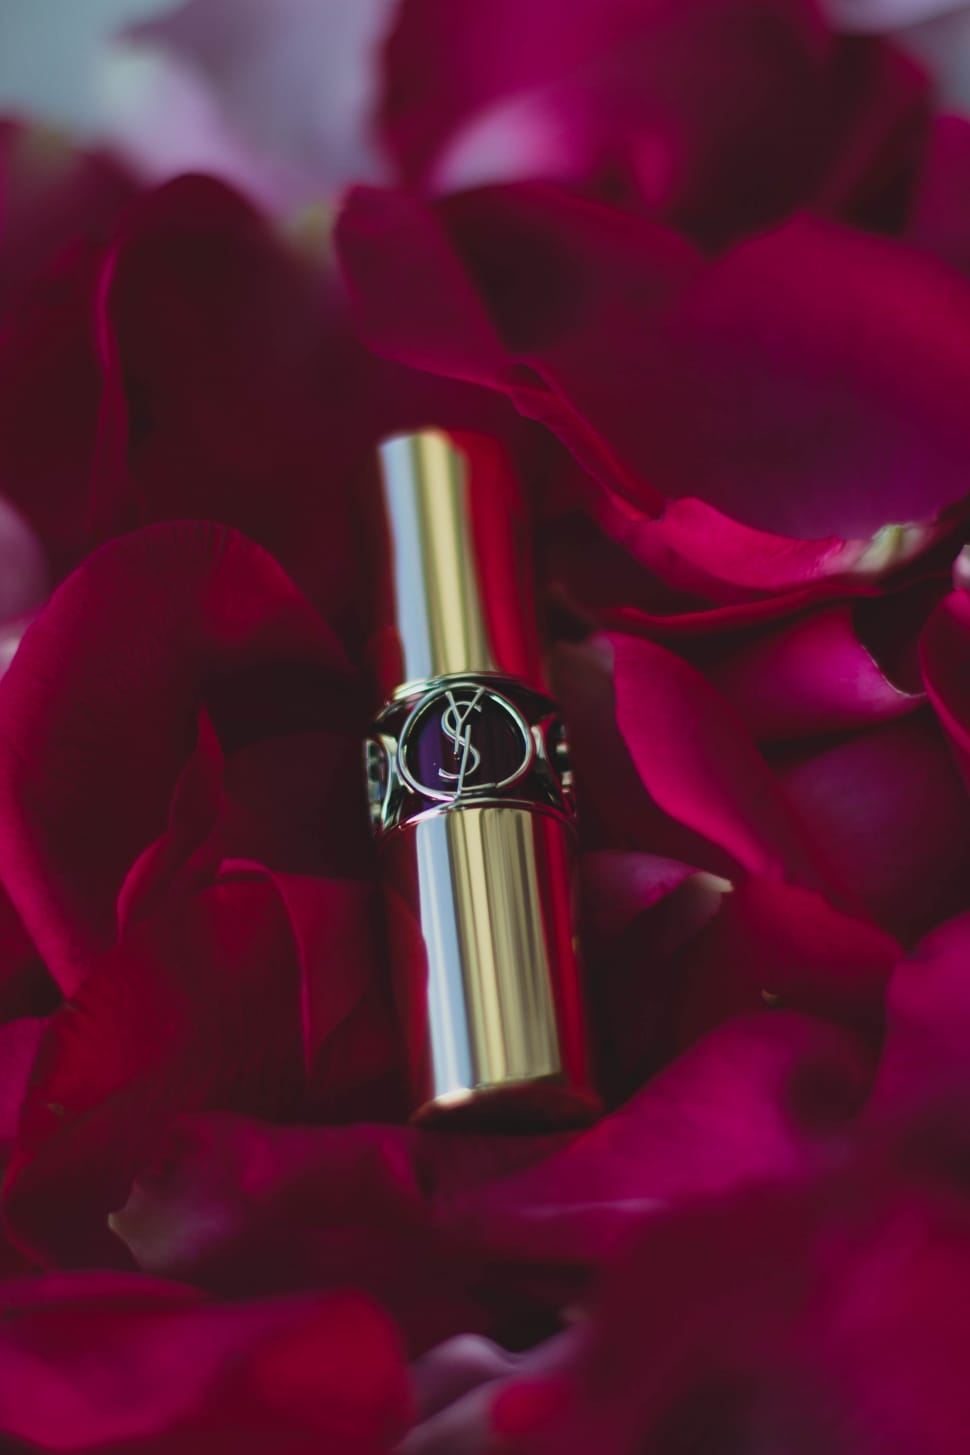 Yves Saint Laurent Lipstick Surrounded With Red Rose - Yves Saint Laurent Lipstick Flower , HD Wallpaper & Backgrounds